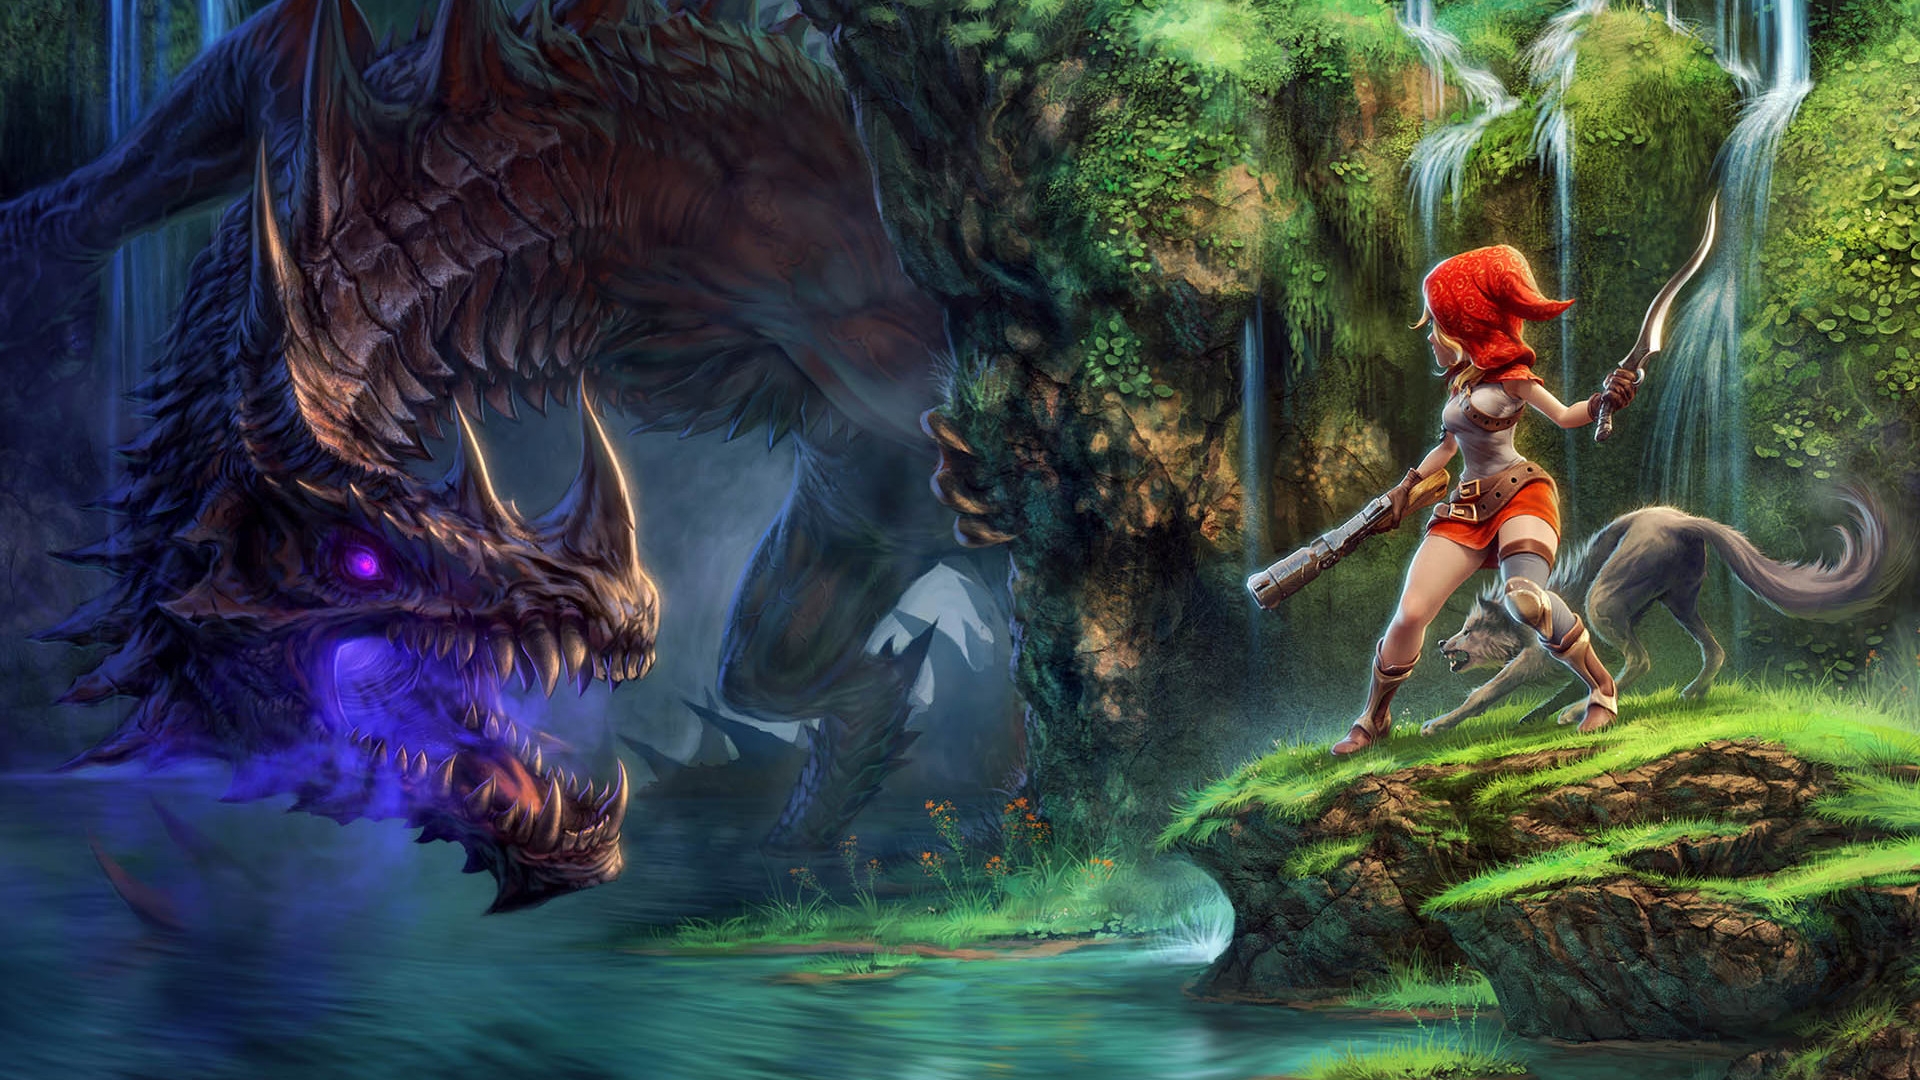 Dragon Fin Soup Game for 1920 x 1080 HDTV 1080p resolution